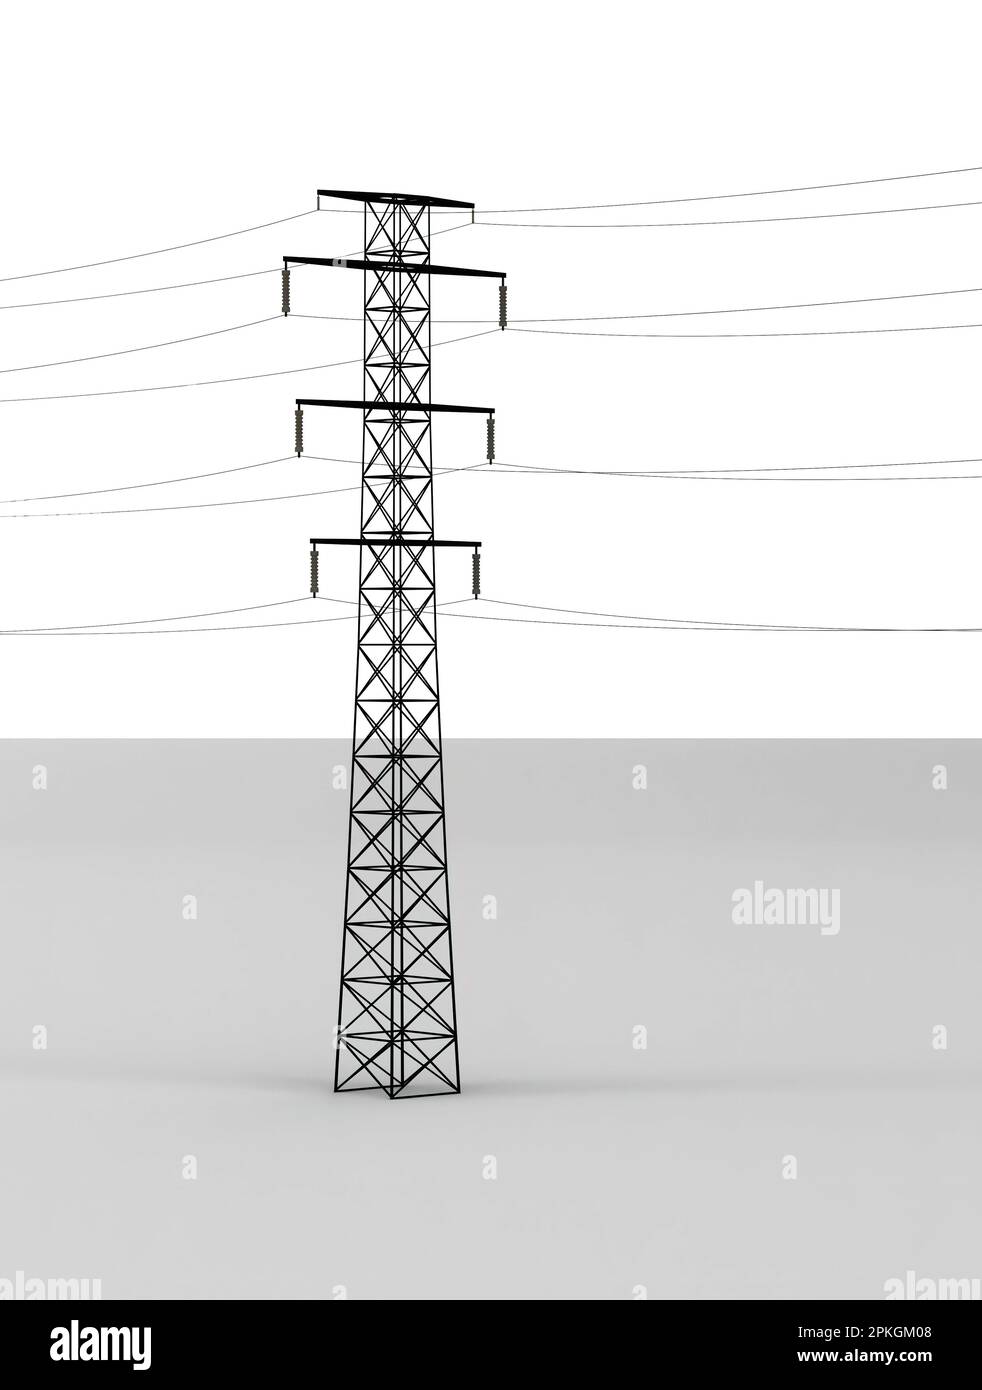 A 3D illustration of high voltage power lines against a white background, providing a modern and sleek visual for energy and electrical concepts Stock Photo